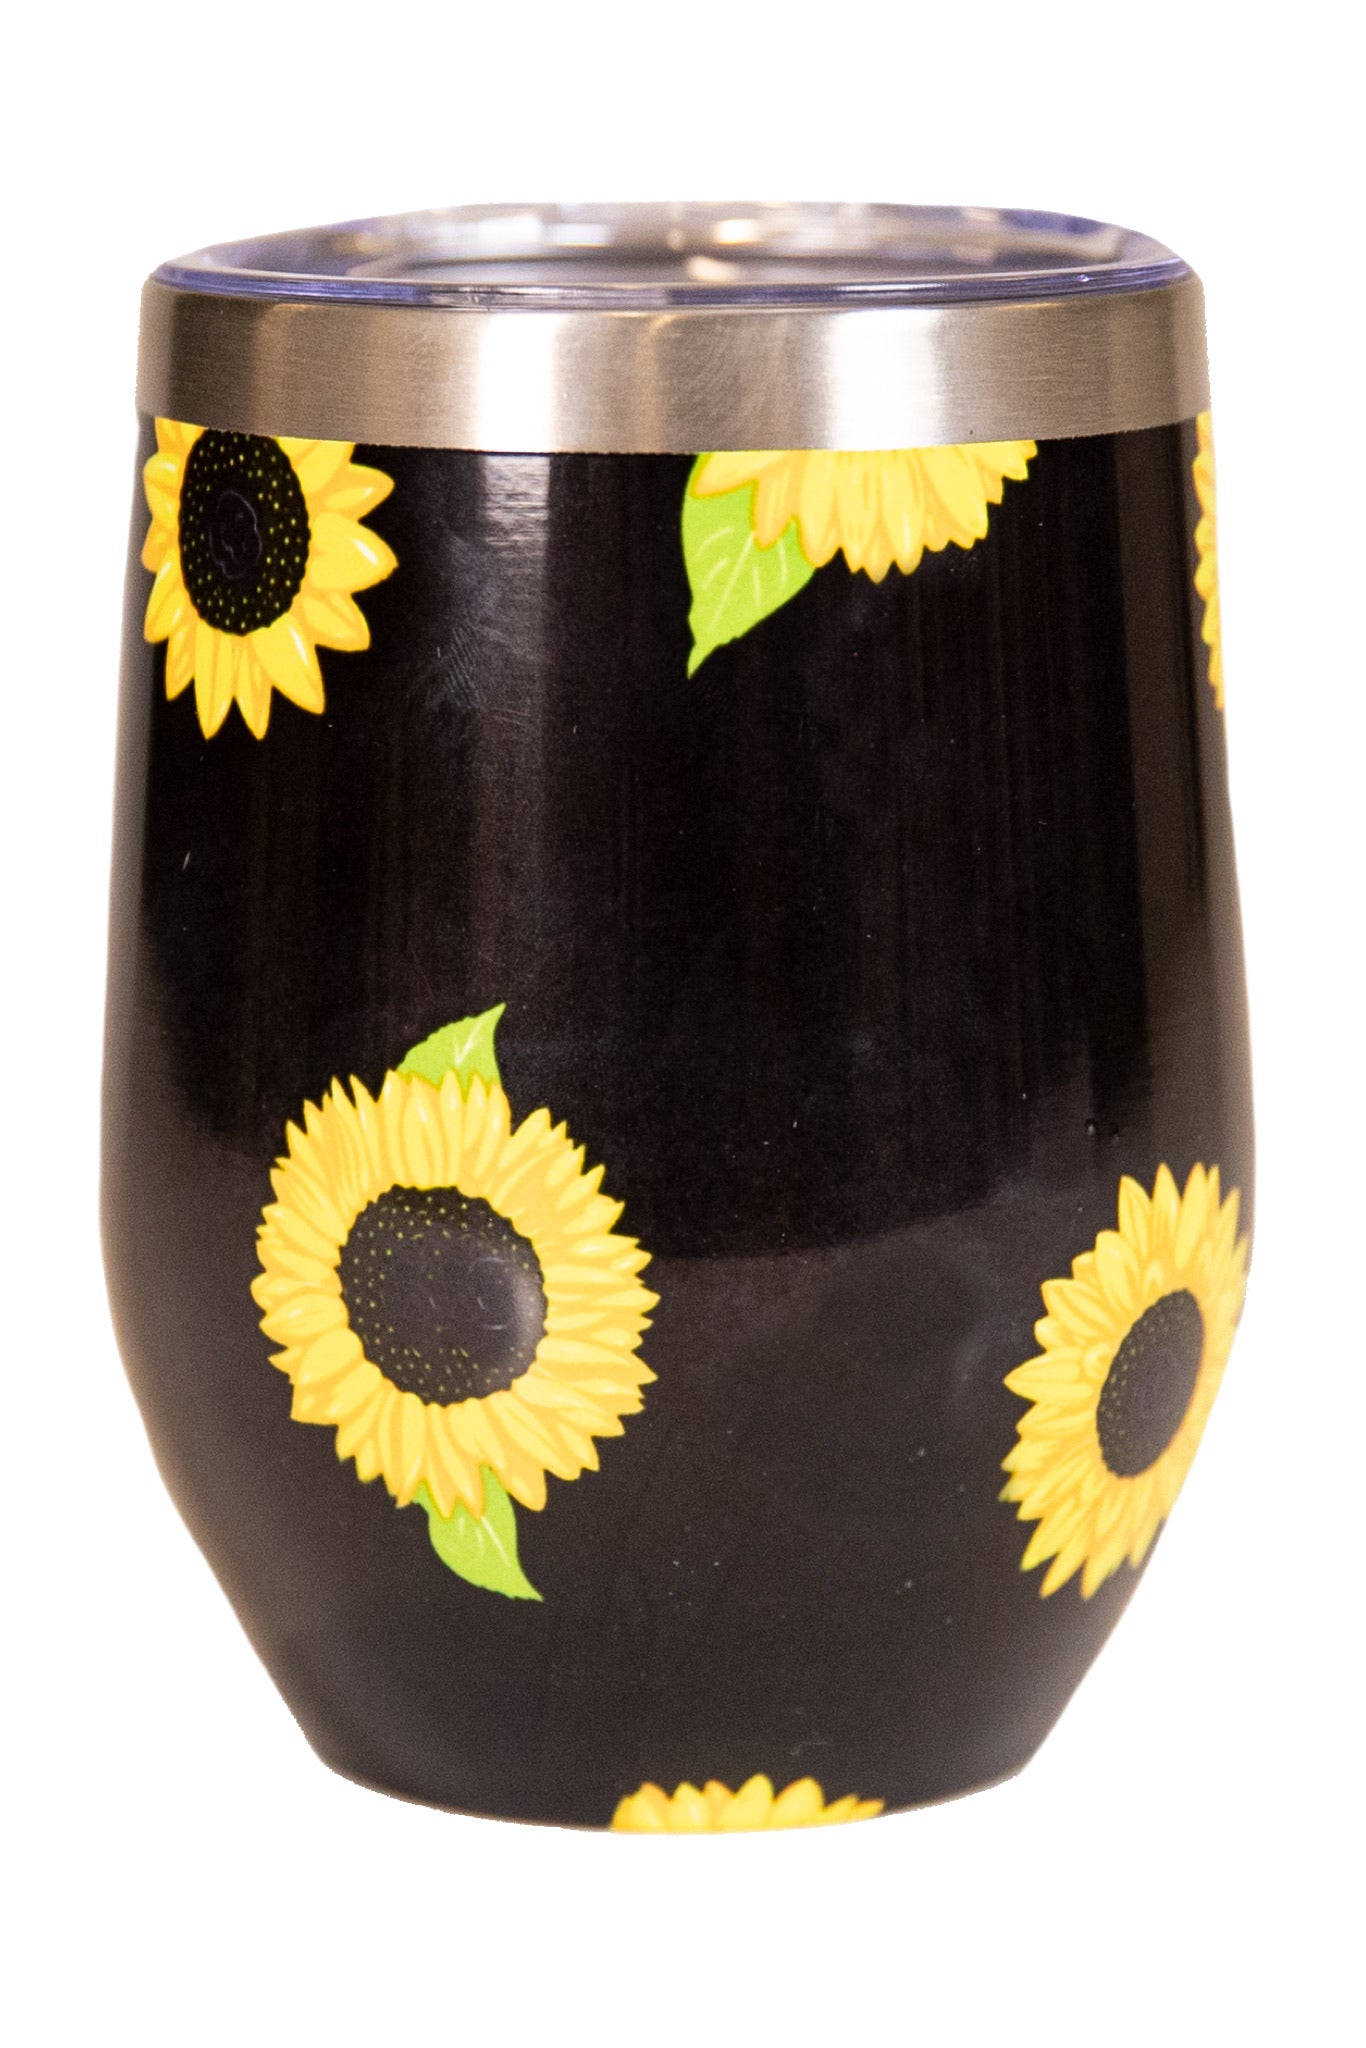 Simply Southern "Sunflower" Drinkware